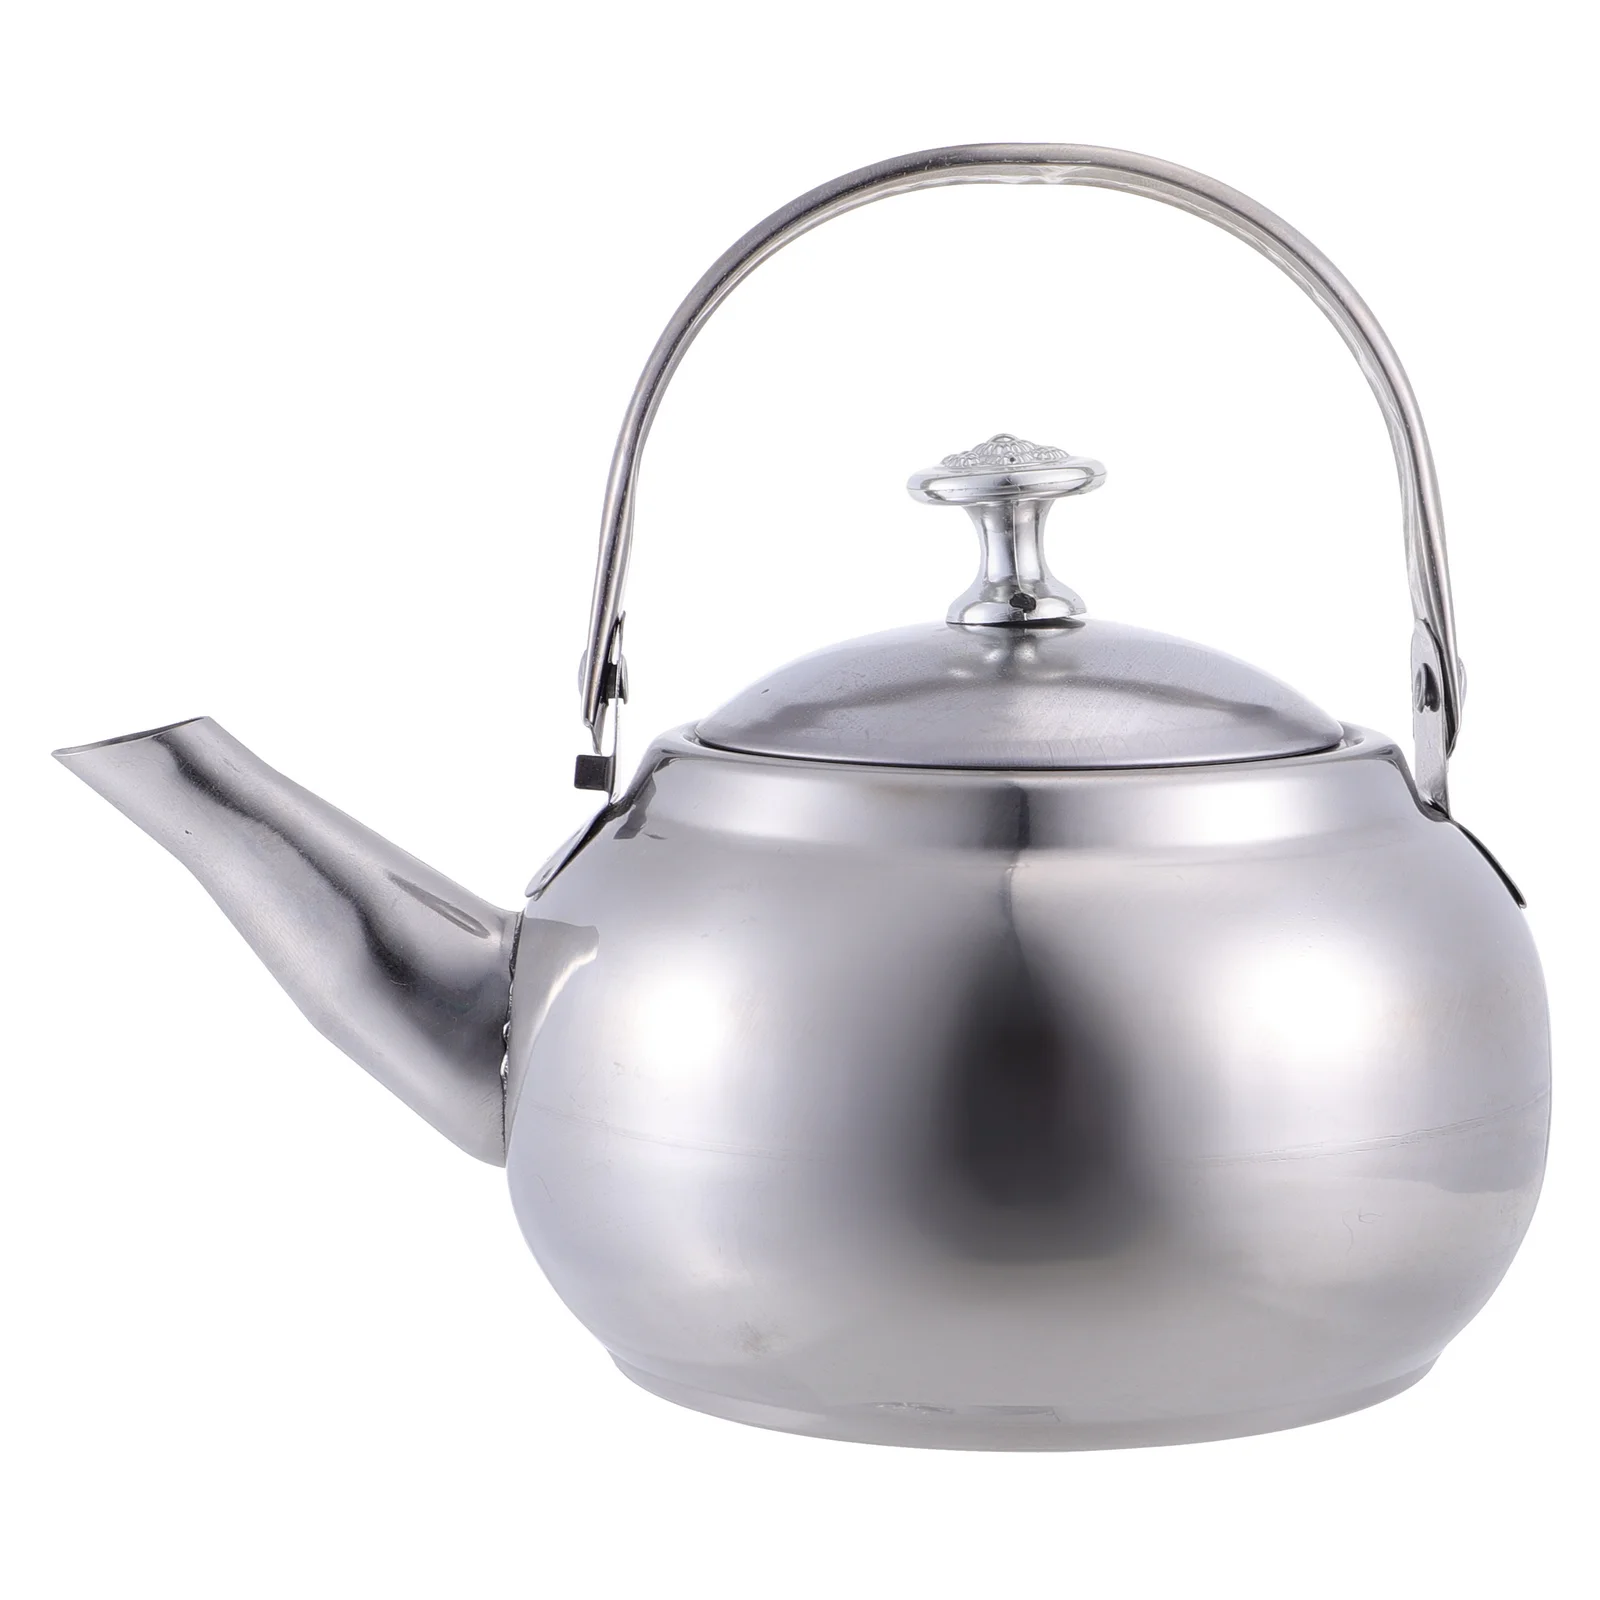 

Pot Espresso Ground Thicken Water Kettle Universal Boiling Stainless Steel Teakettle Household Make